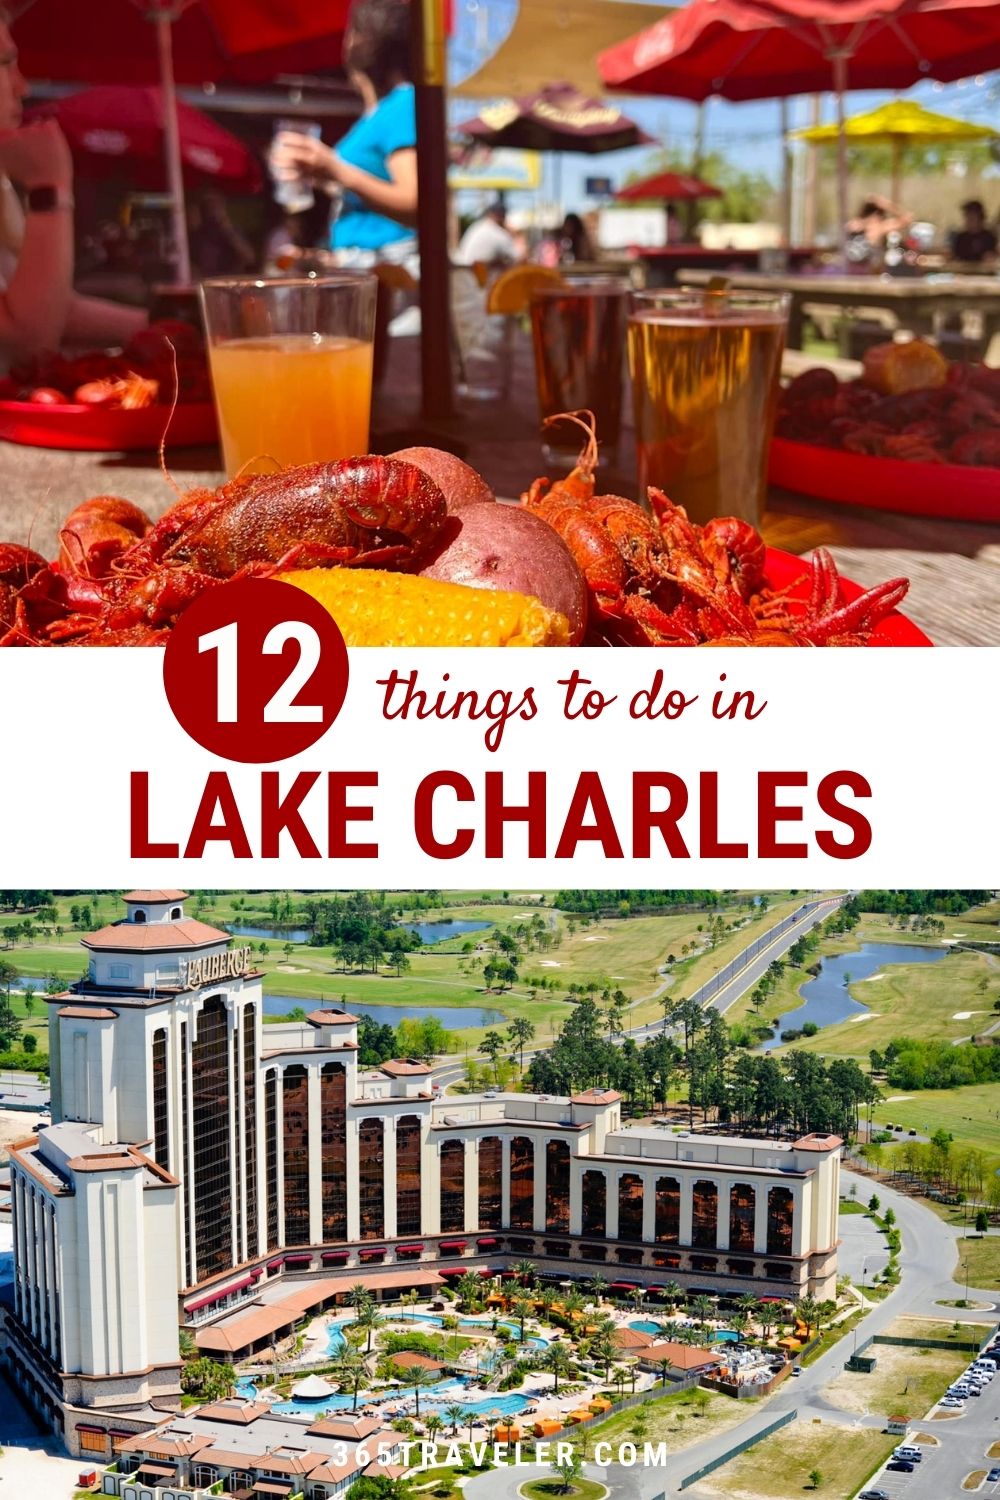 11+ Outstanding Things To Do in Lake Charles, LA